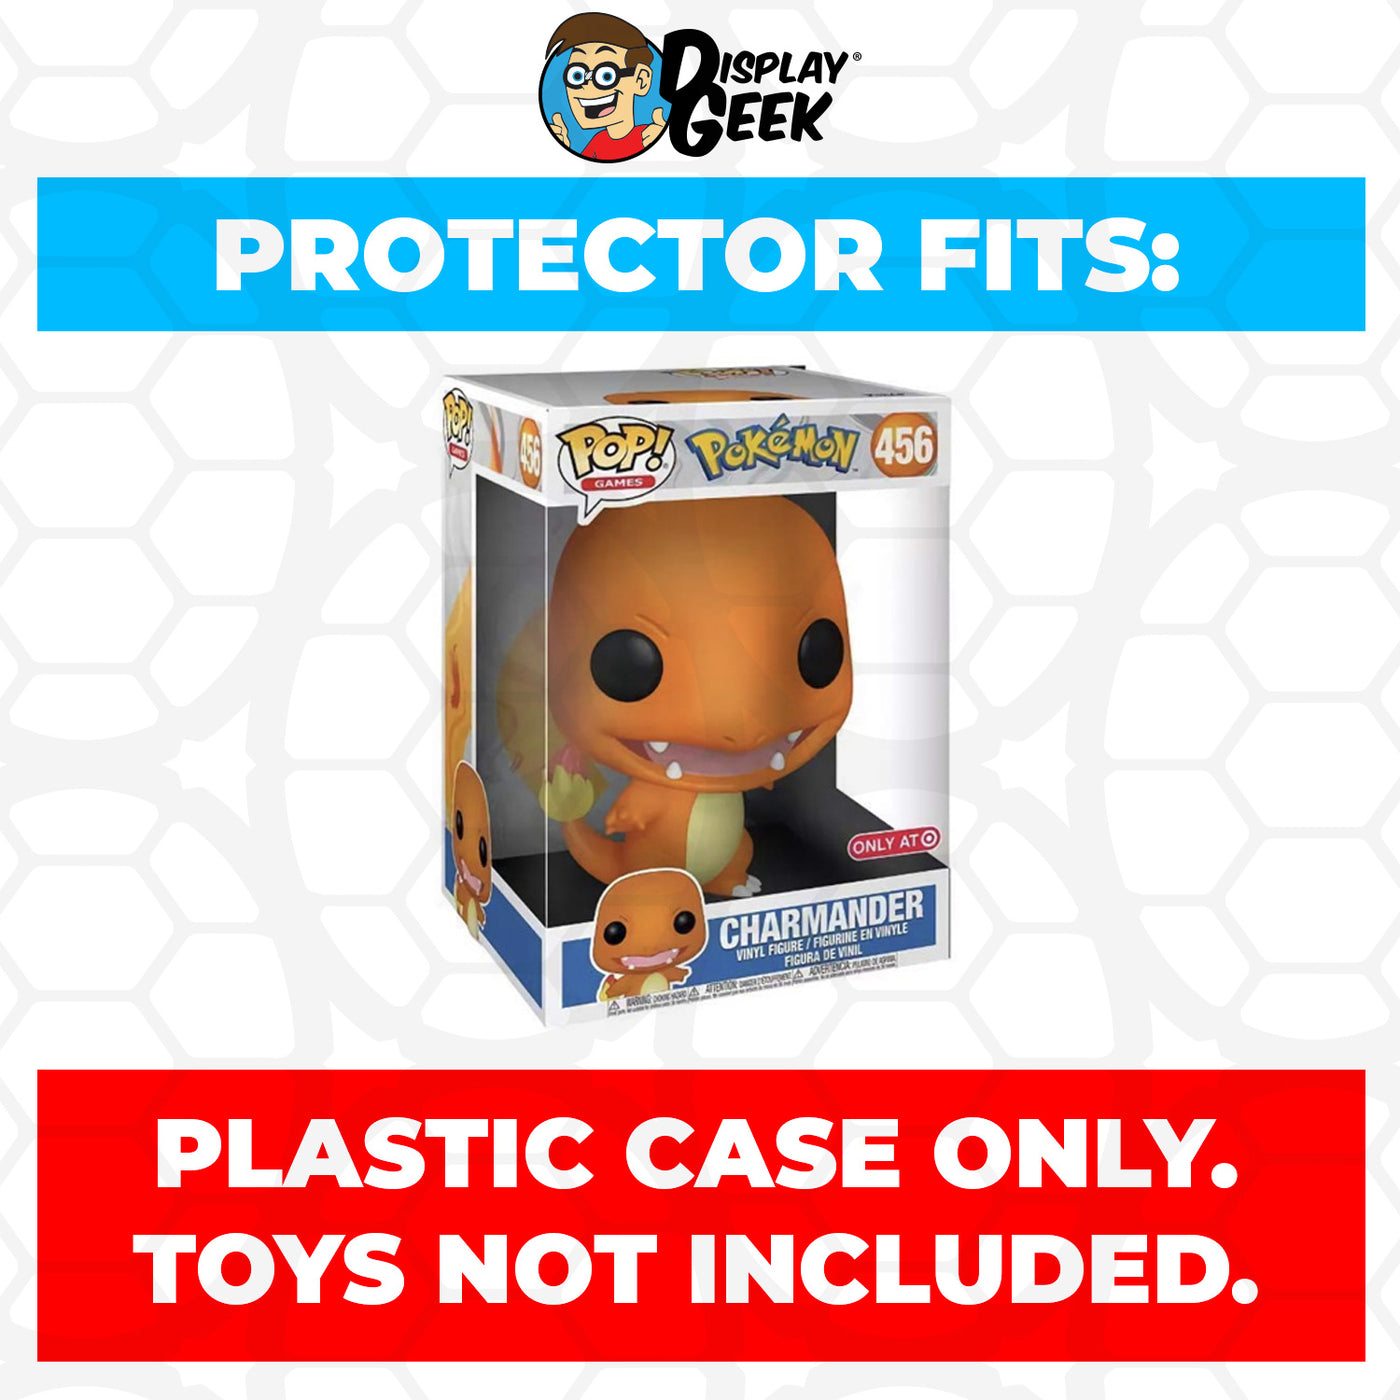 Pop Protector for 10 inch Charmander #456 Jumbo Funko Pop on The Protector Guide App by Display Geek